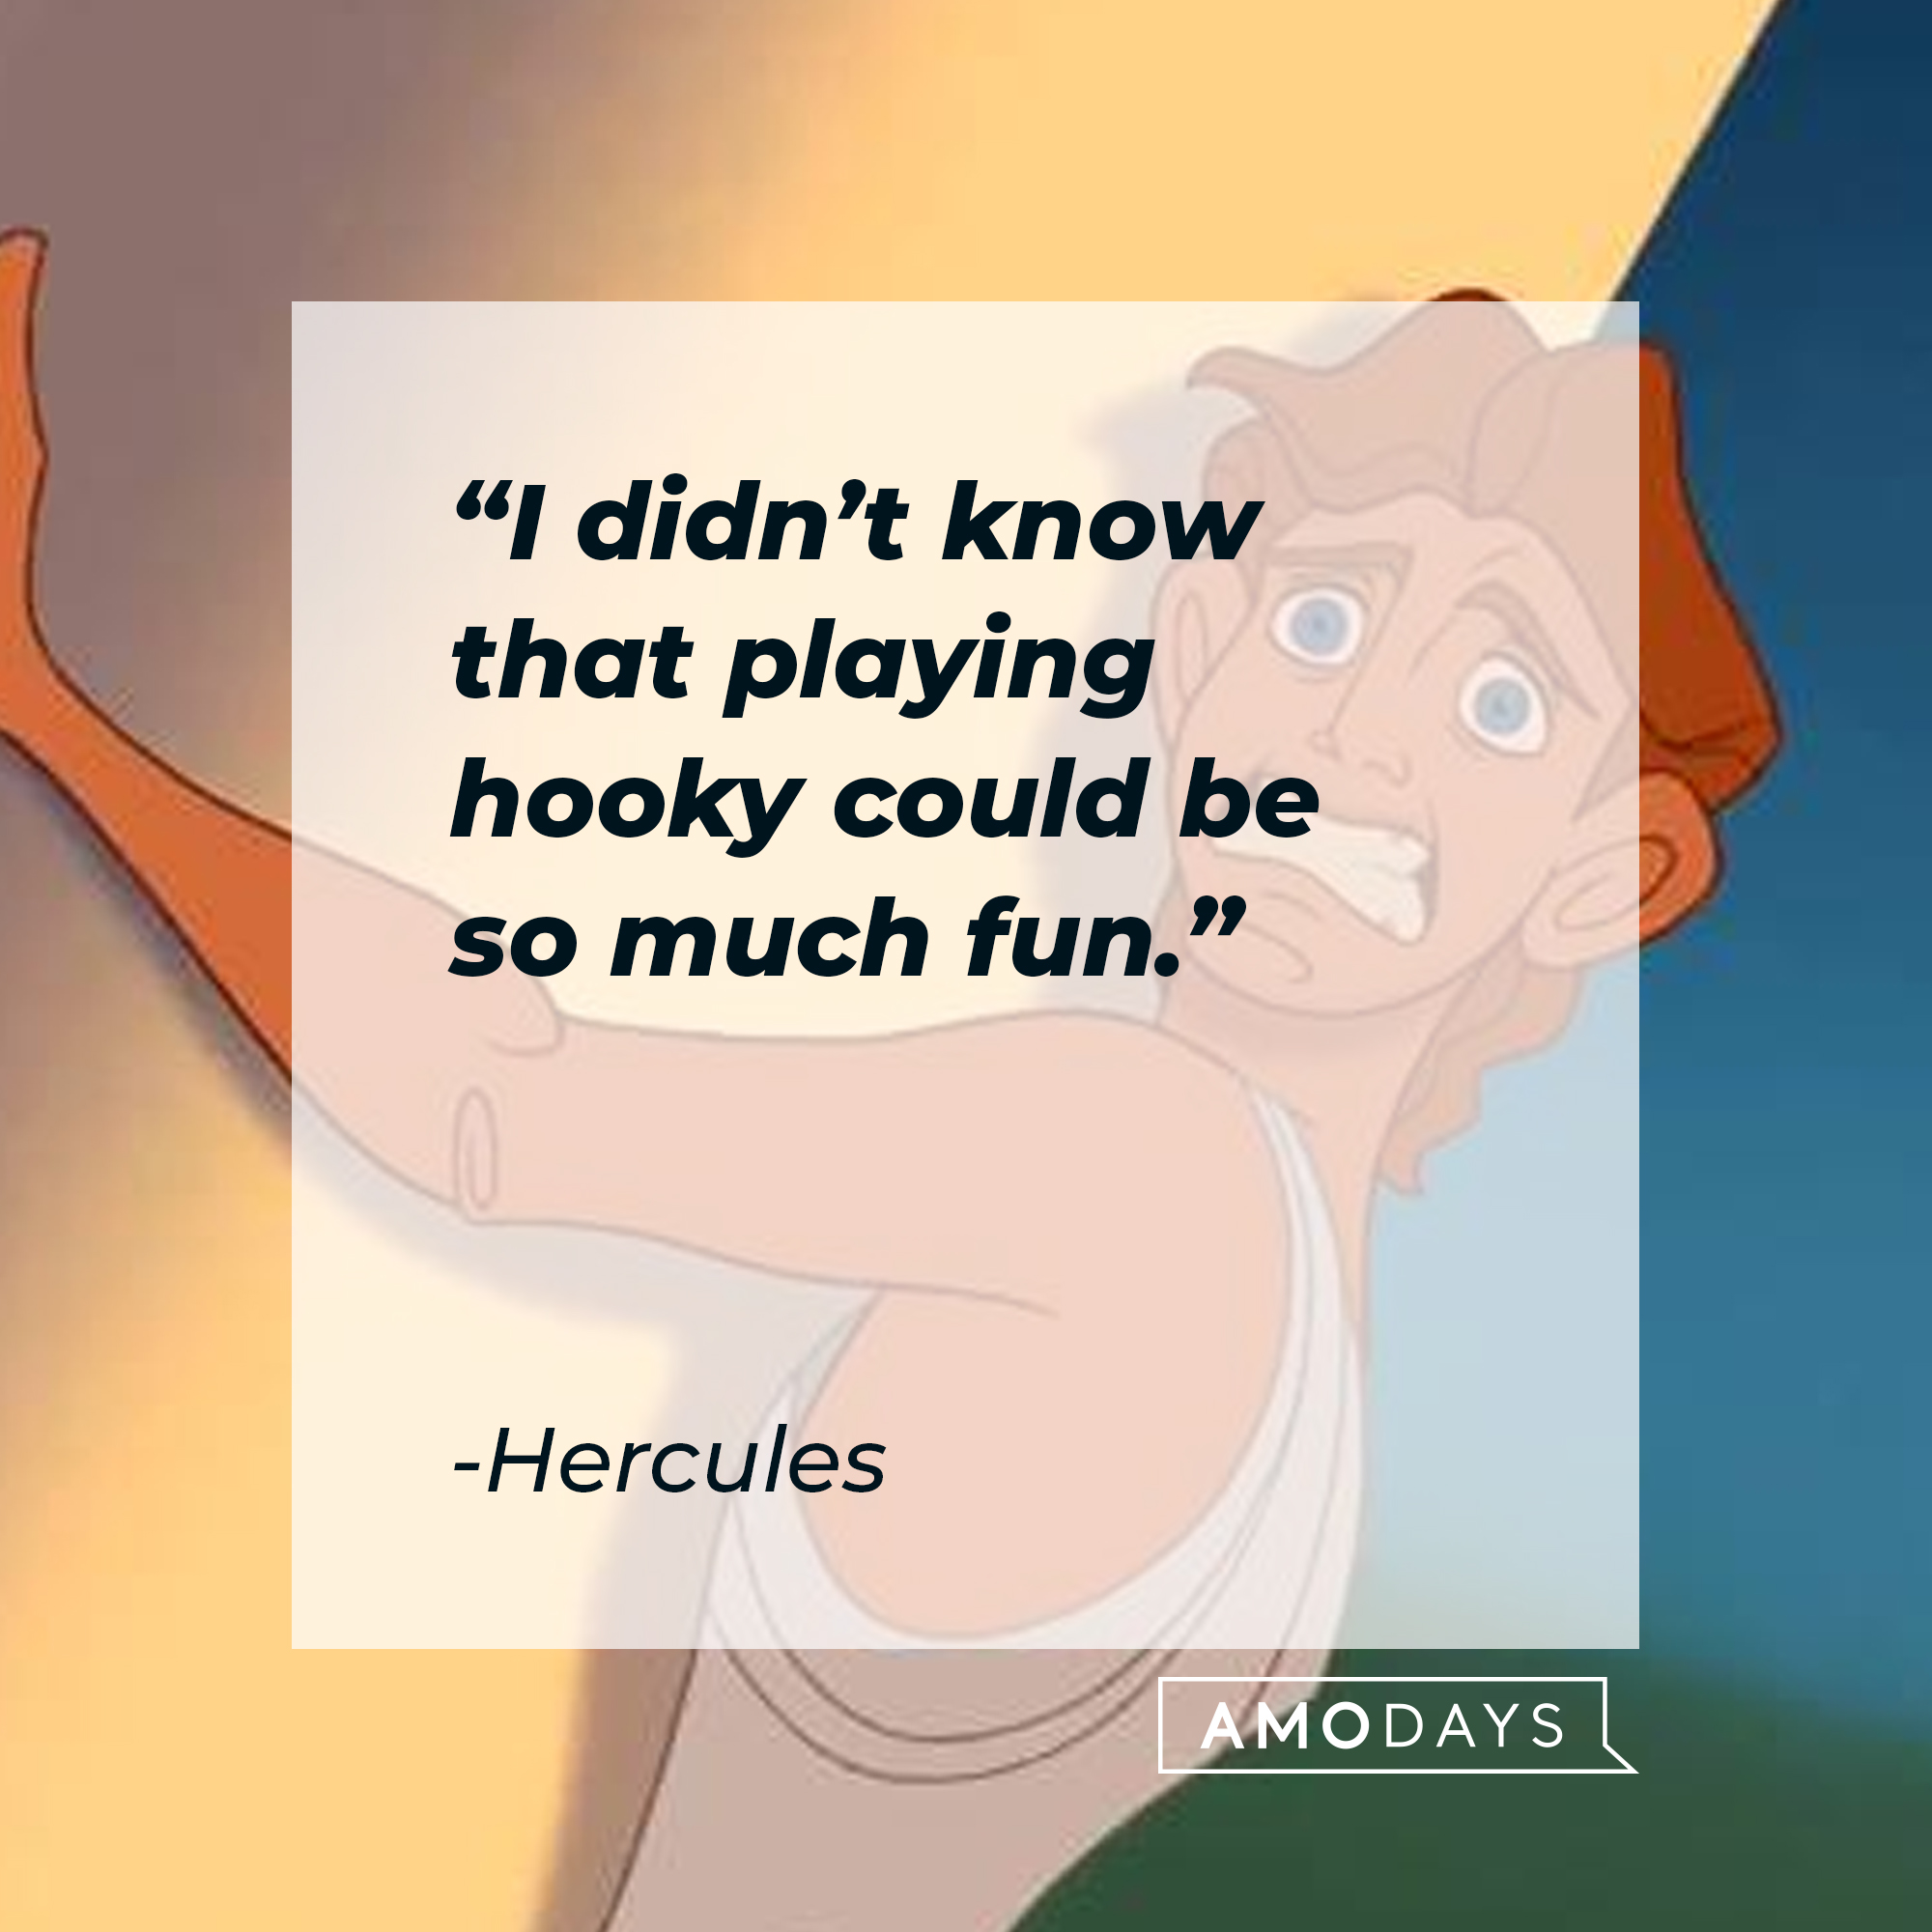 Hercules from the movie "Hercules" with his quote: “I didn’t know that playing hooky could be so much fun.” | Source: Facebook.com/DisneyHercules